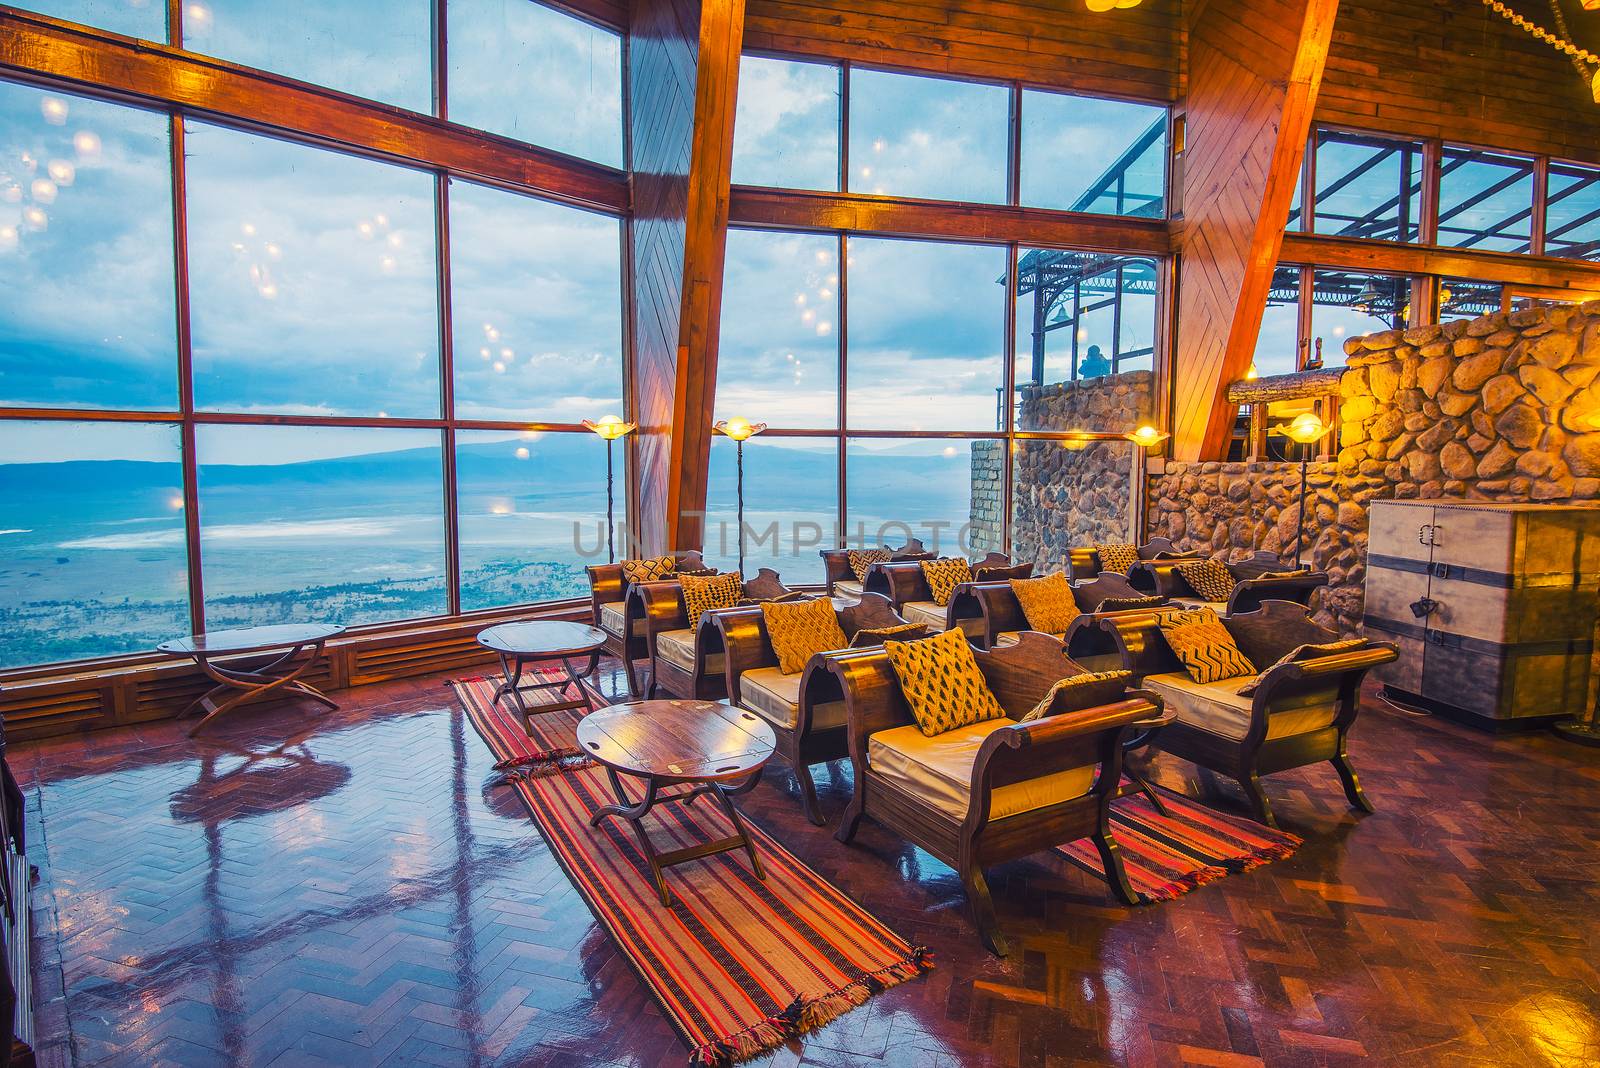 Interior of the Ngorongoro Wildlife Lodge with a glass wall overlooking the park by nickfox